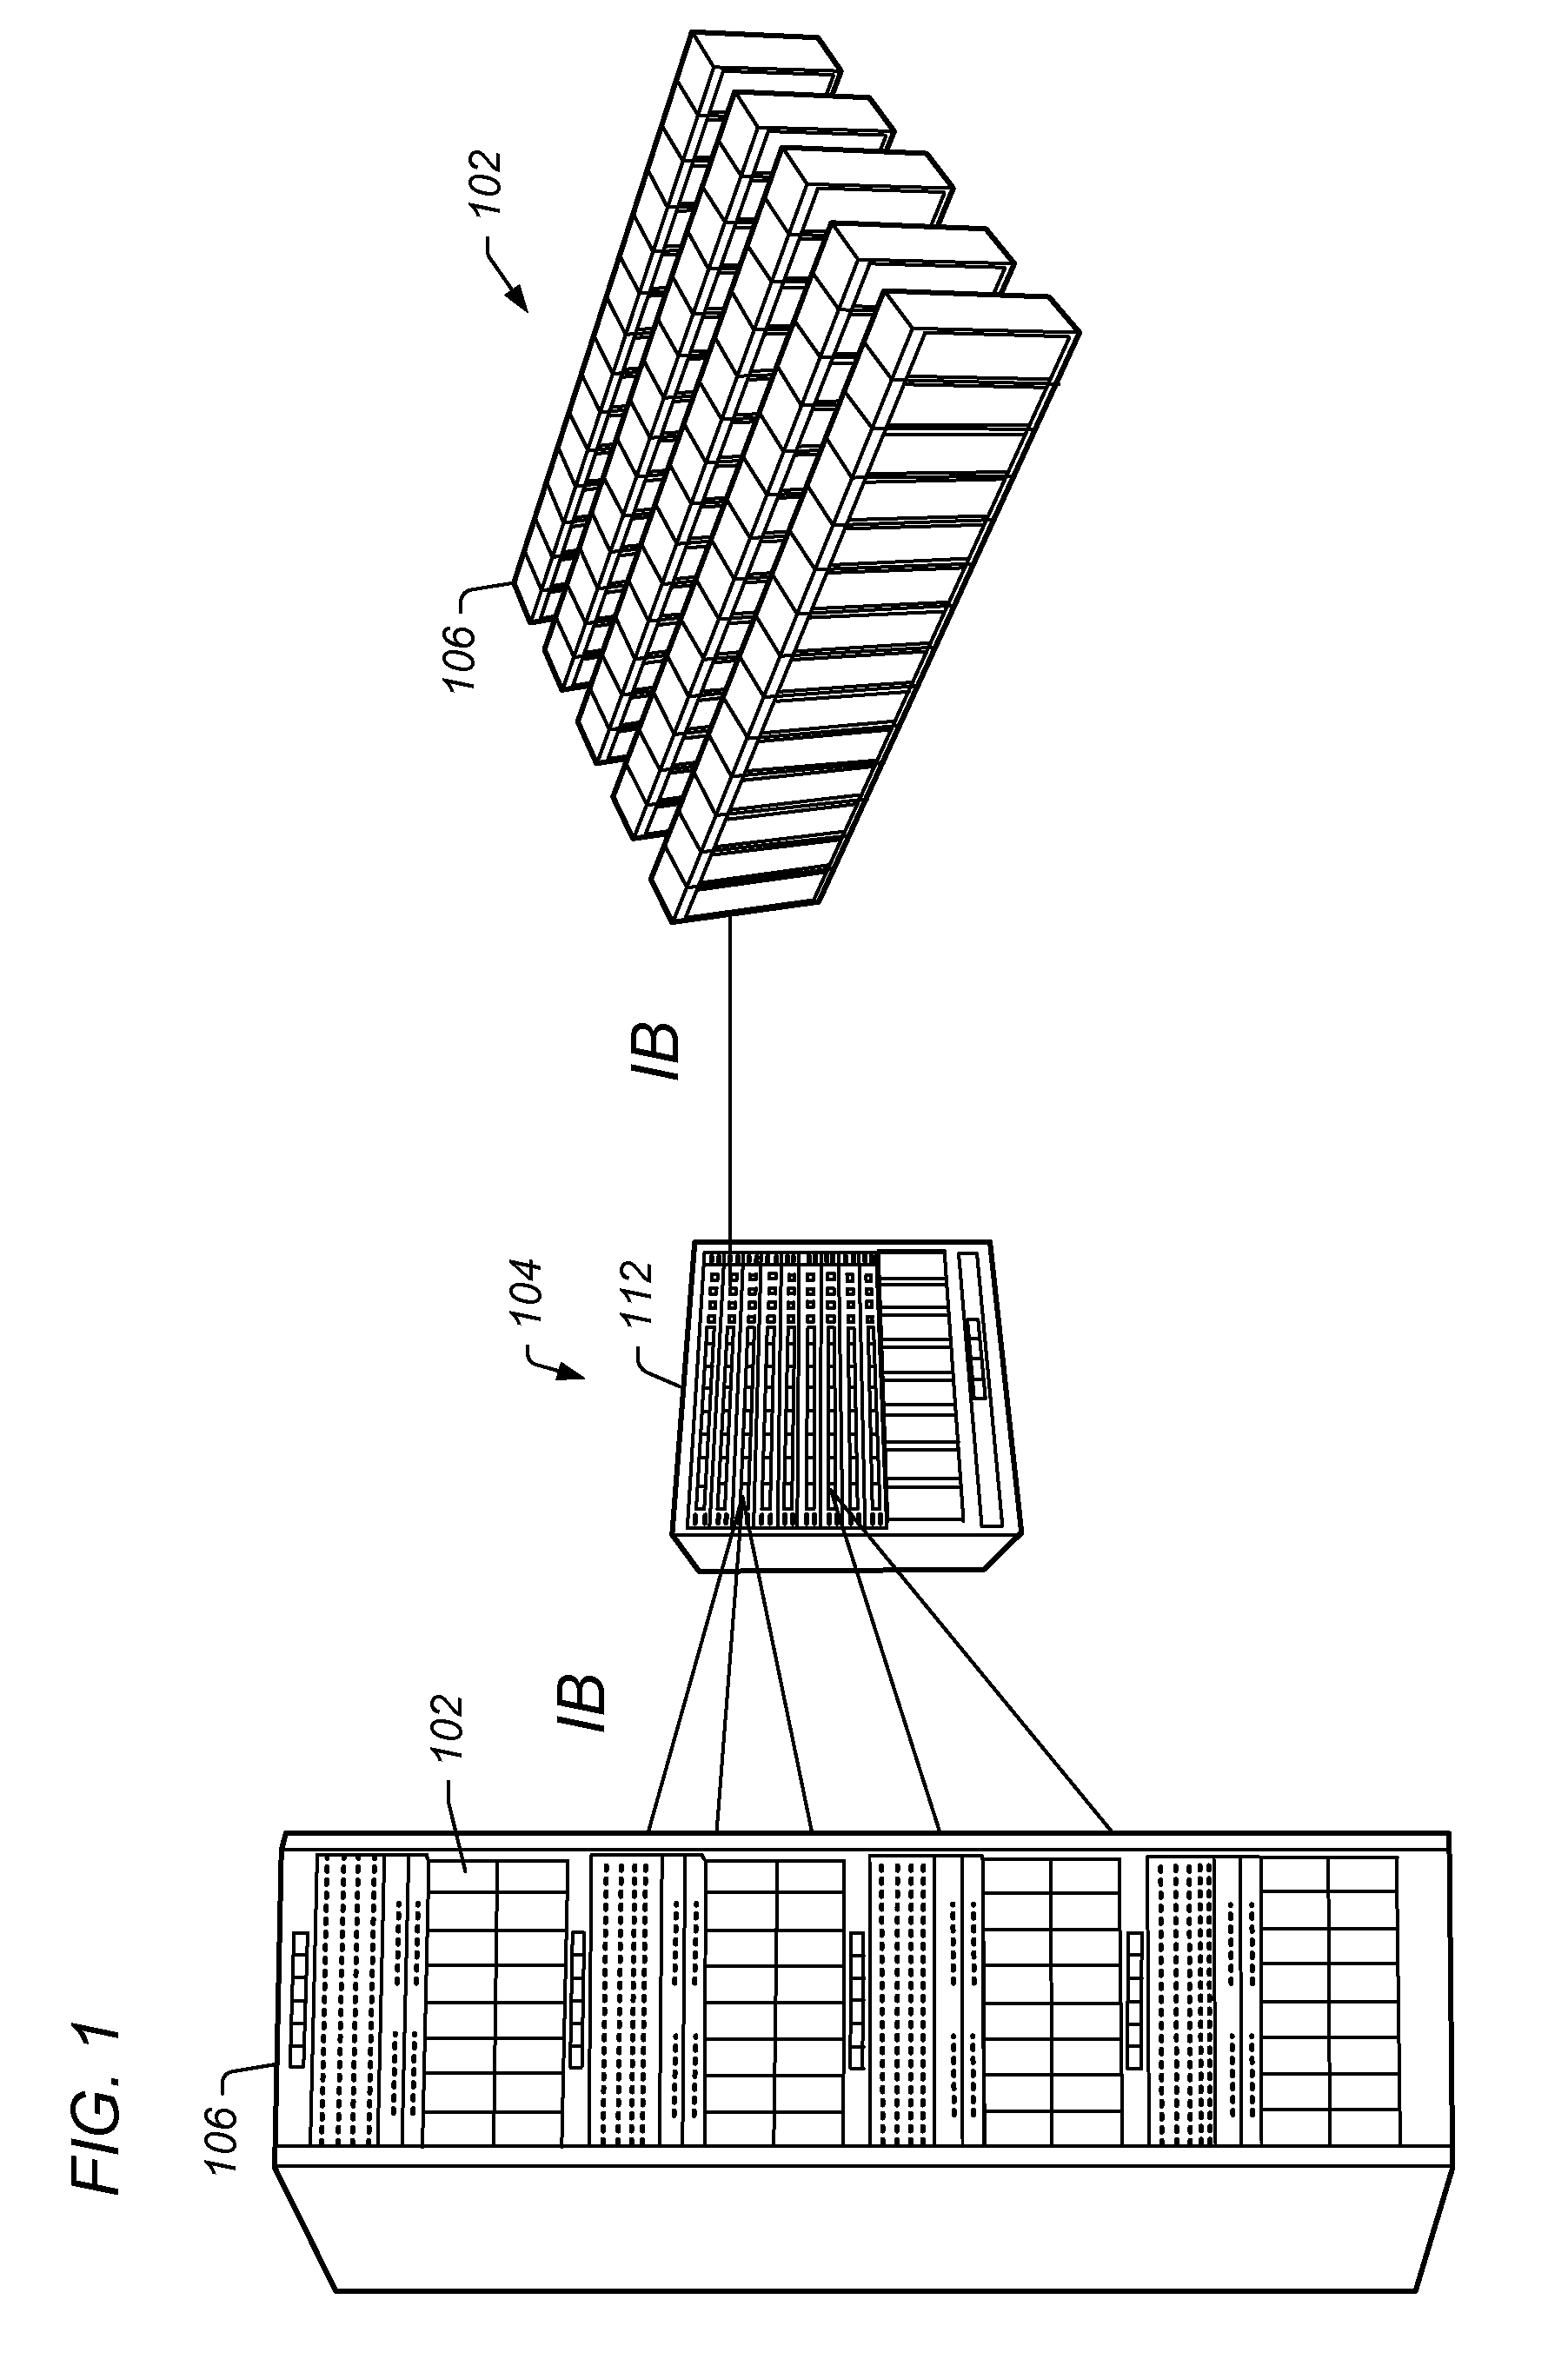 Scalable Interface for Connecting Multiple Computer Systems Which Performs Parallel MPI Header Matching